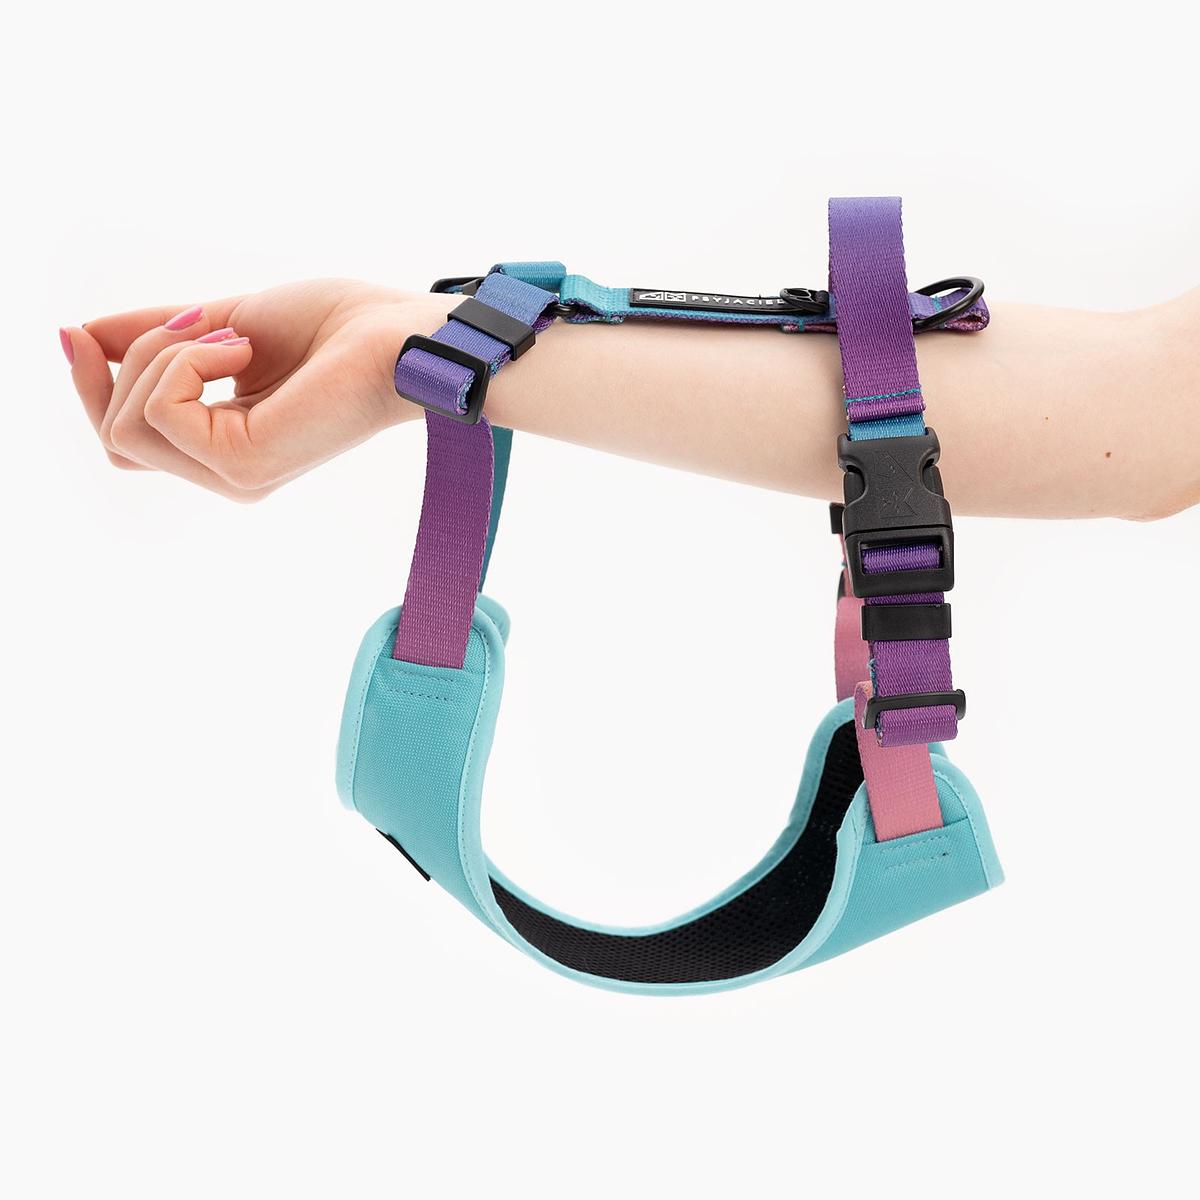 Dog or cat pressure-free harness "Under my ombrella" turquoise 